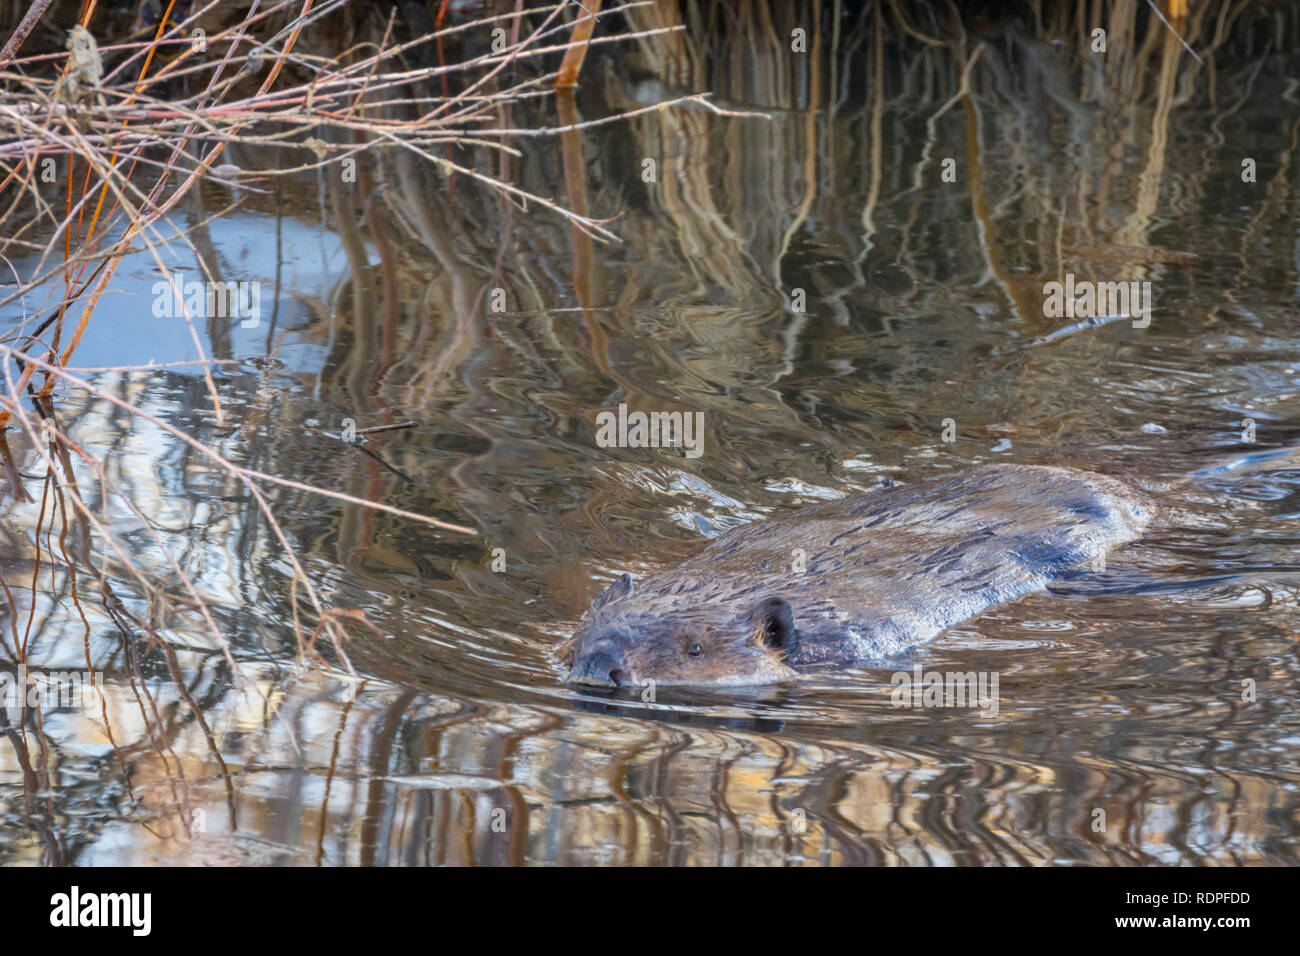 North American Beaver quietly swimming in winter pond among willows, Castle Rock Colorado US. Photo taken in January. Stock Photo